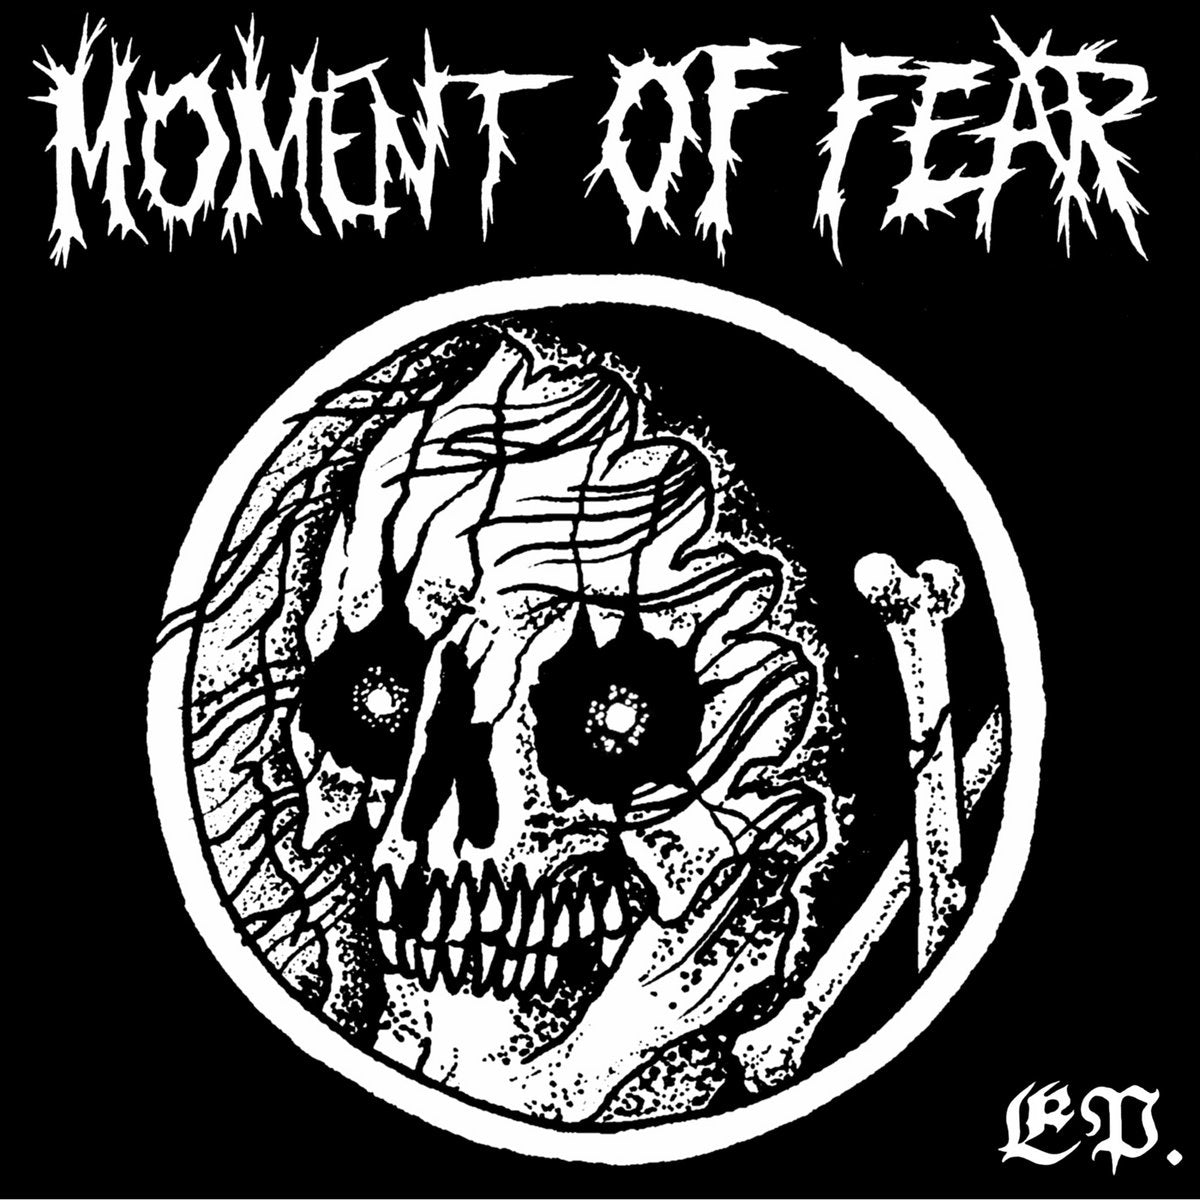 MOMENT OF FEAR - COVID SESSIONS EP Vinyl 7"